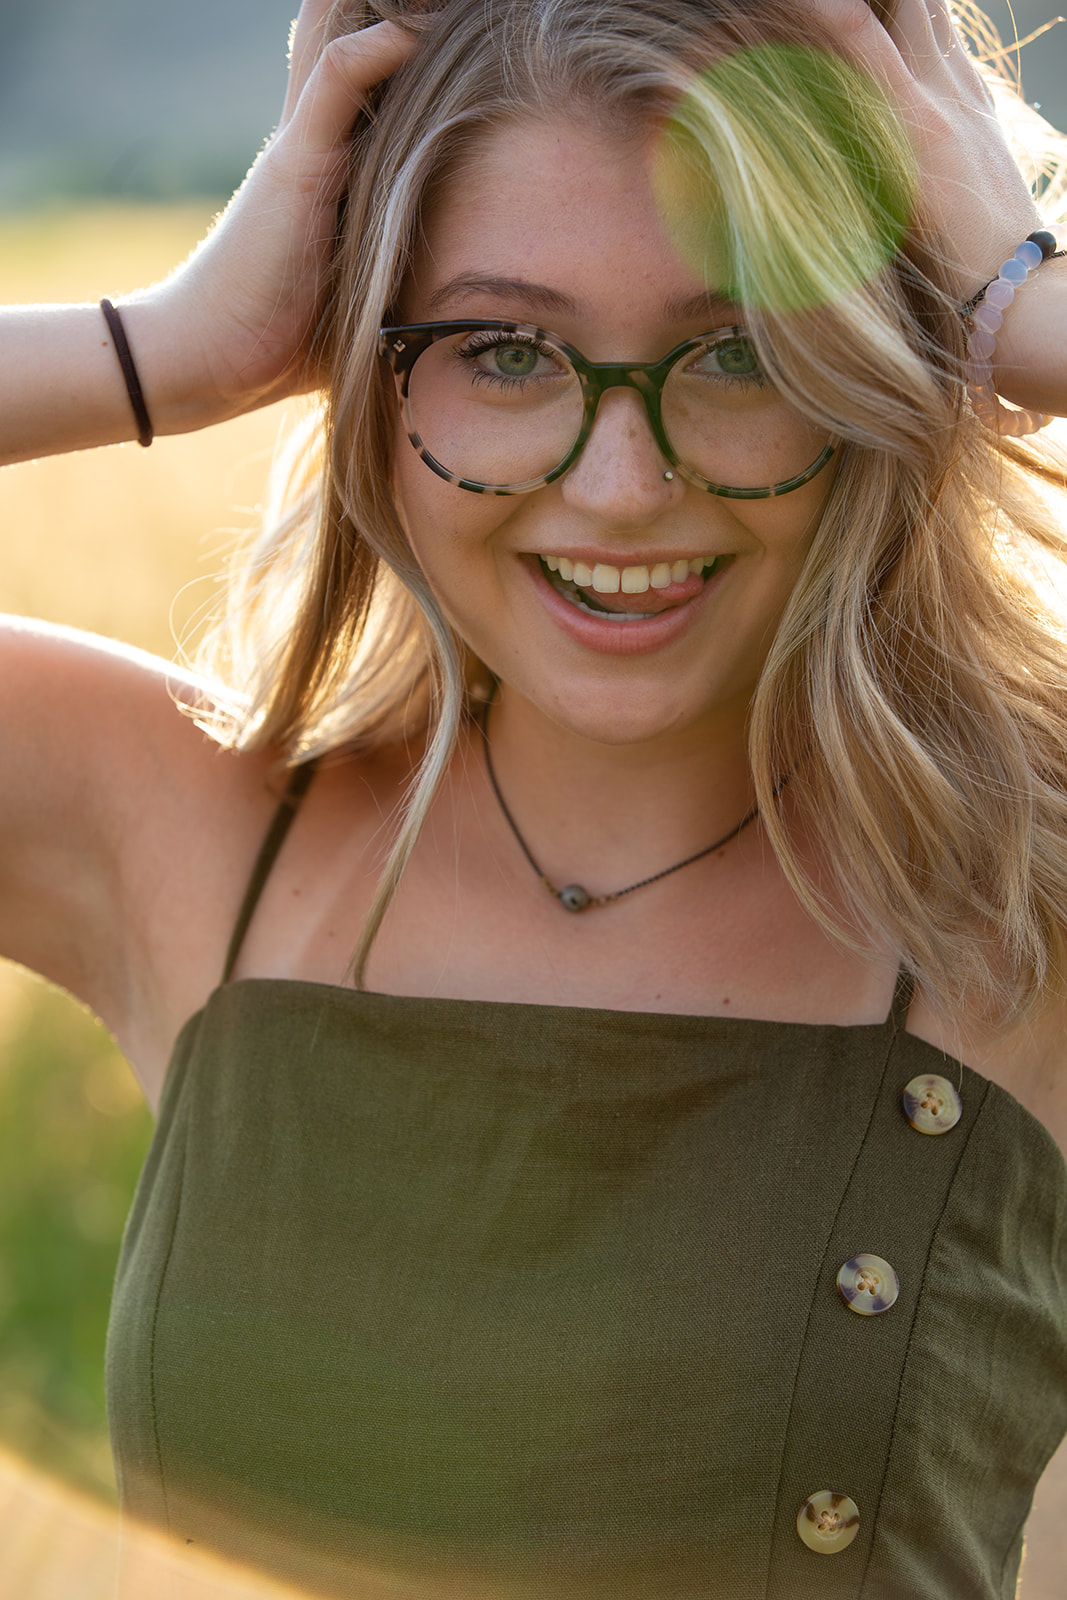 Senior portrait of a young woman playing with her hair and sticking out her tongue in Fort Collins, Colorado - John Robson Photography